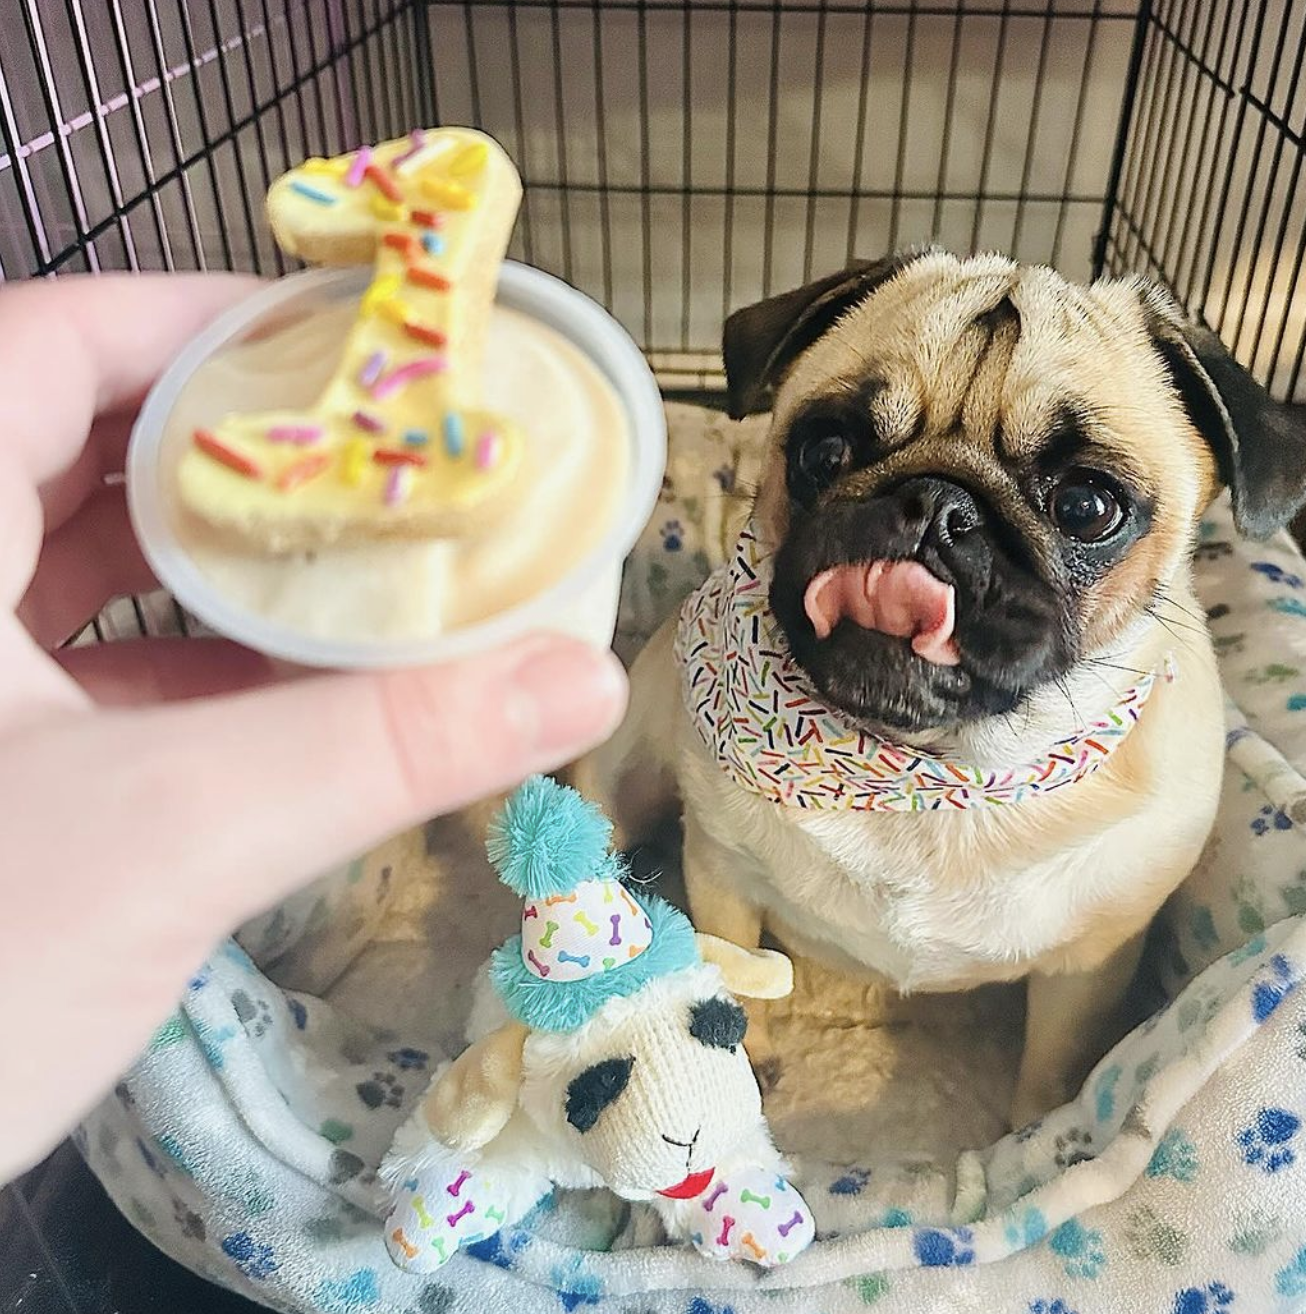 THE PASTRY PUG